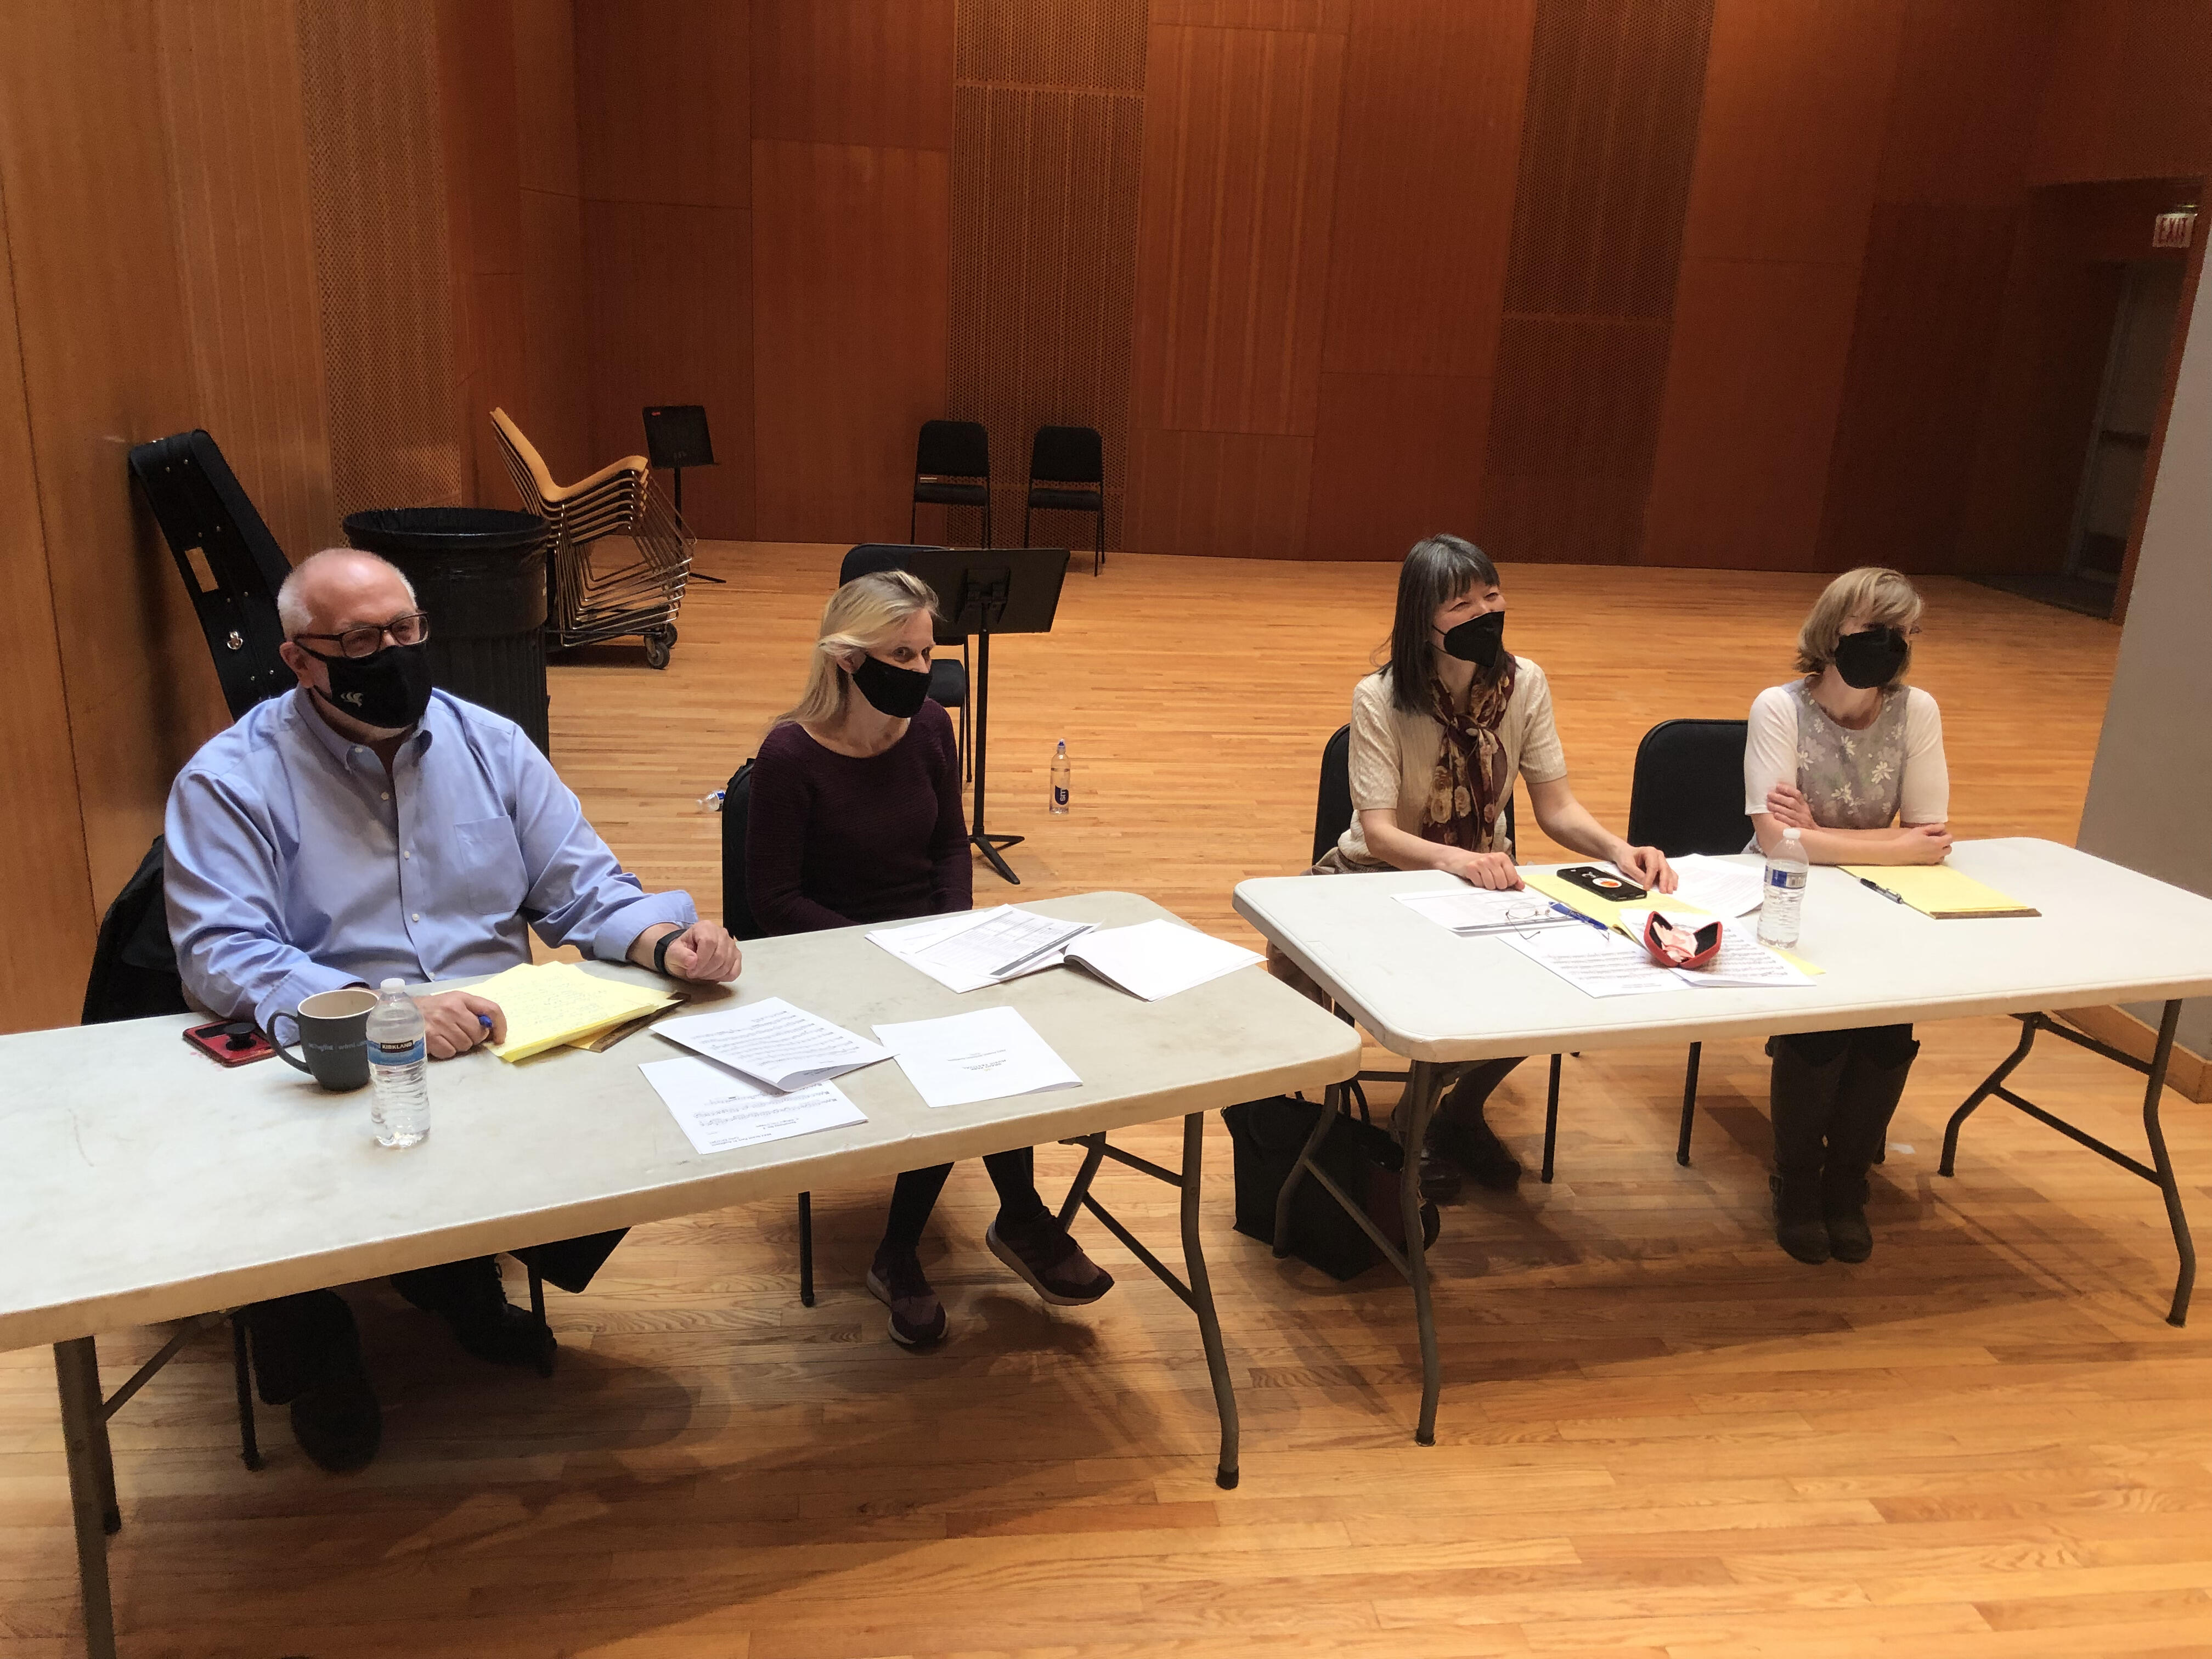 The Project Inclusion audition panel — Grant Park Orchestra members Steven Houser, Jennifer Cappelli, Rika Seko, and Terri Van Valkinburgh hear young string players vying for the summer fellowship